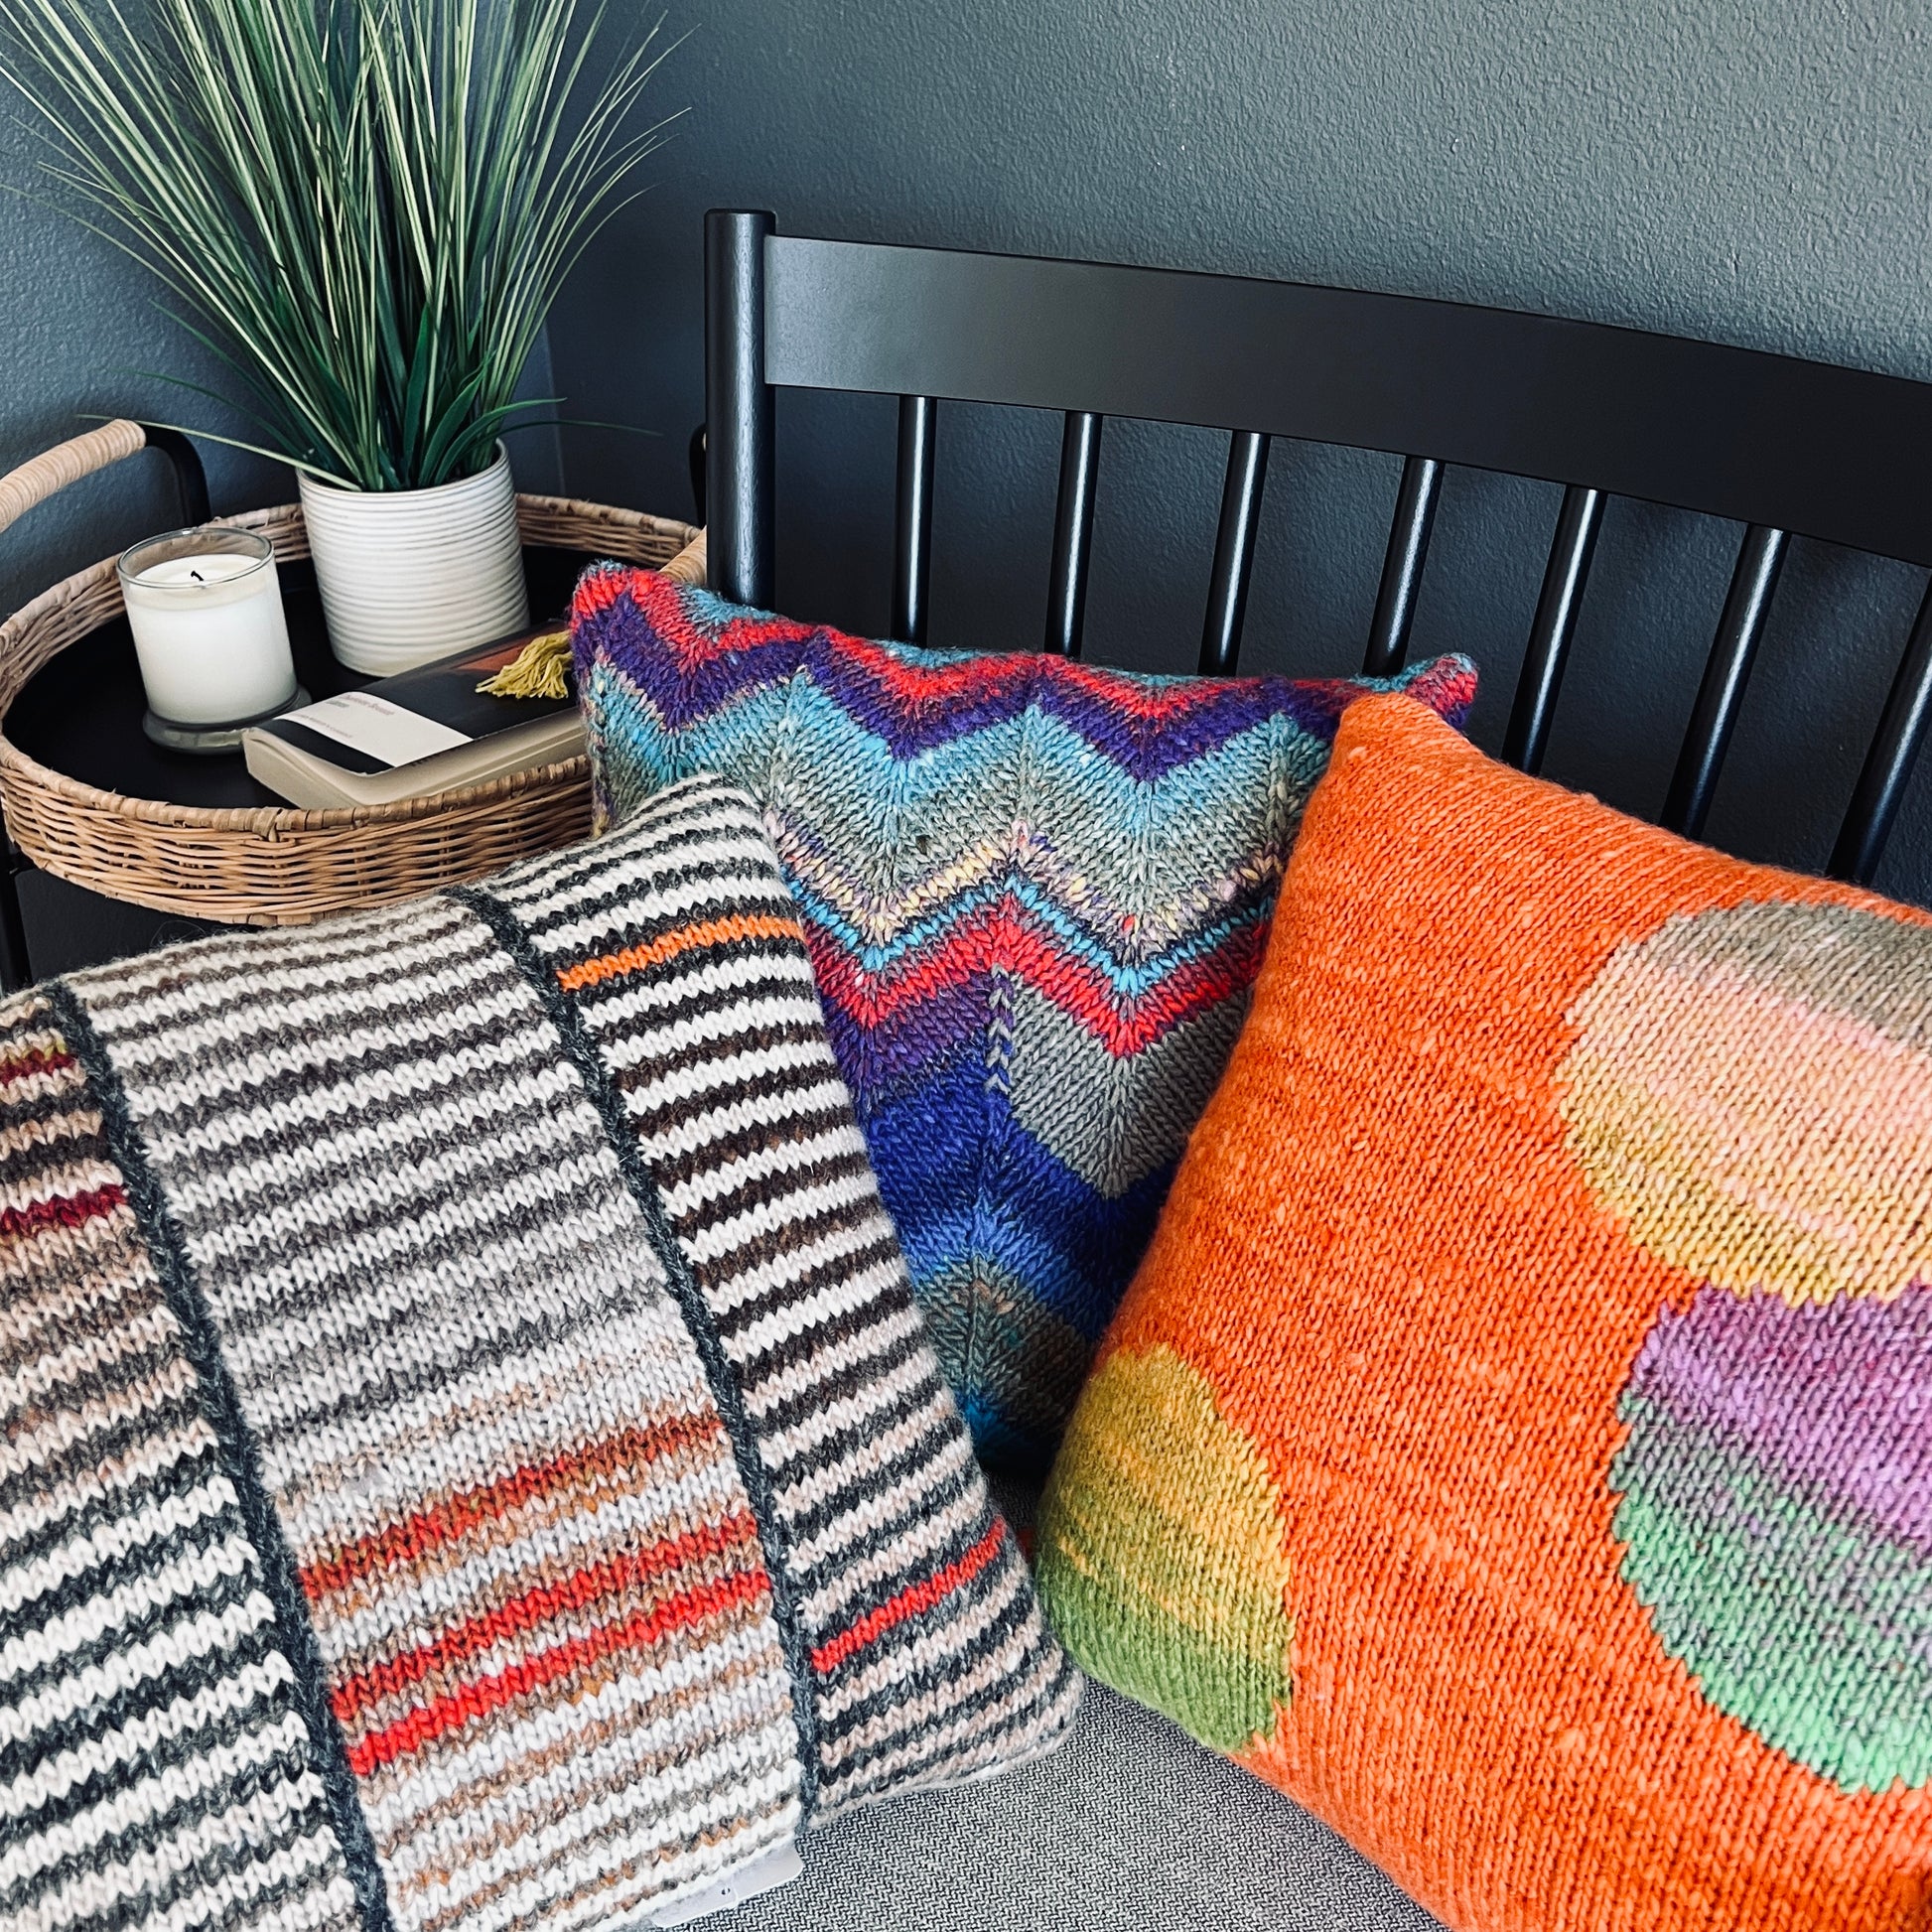 A close-up of three separate, hand-knit  pillows showcase the expert craftmanship of Susan's work.